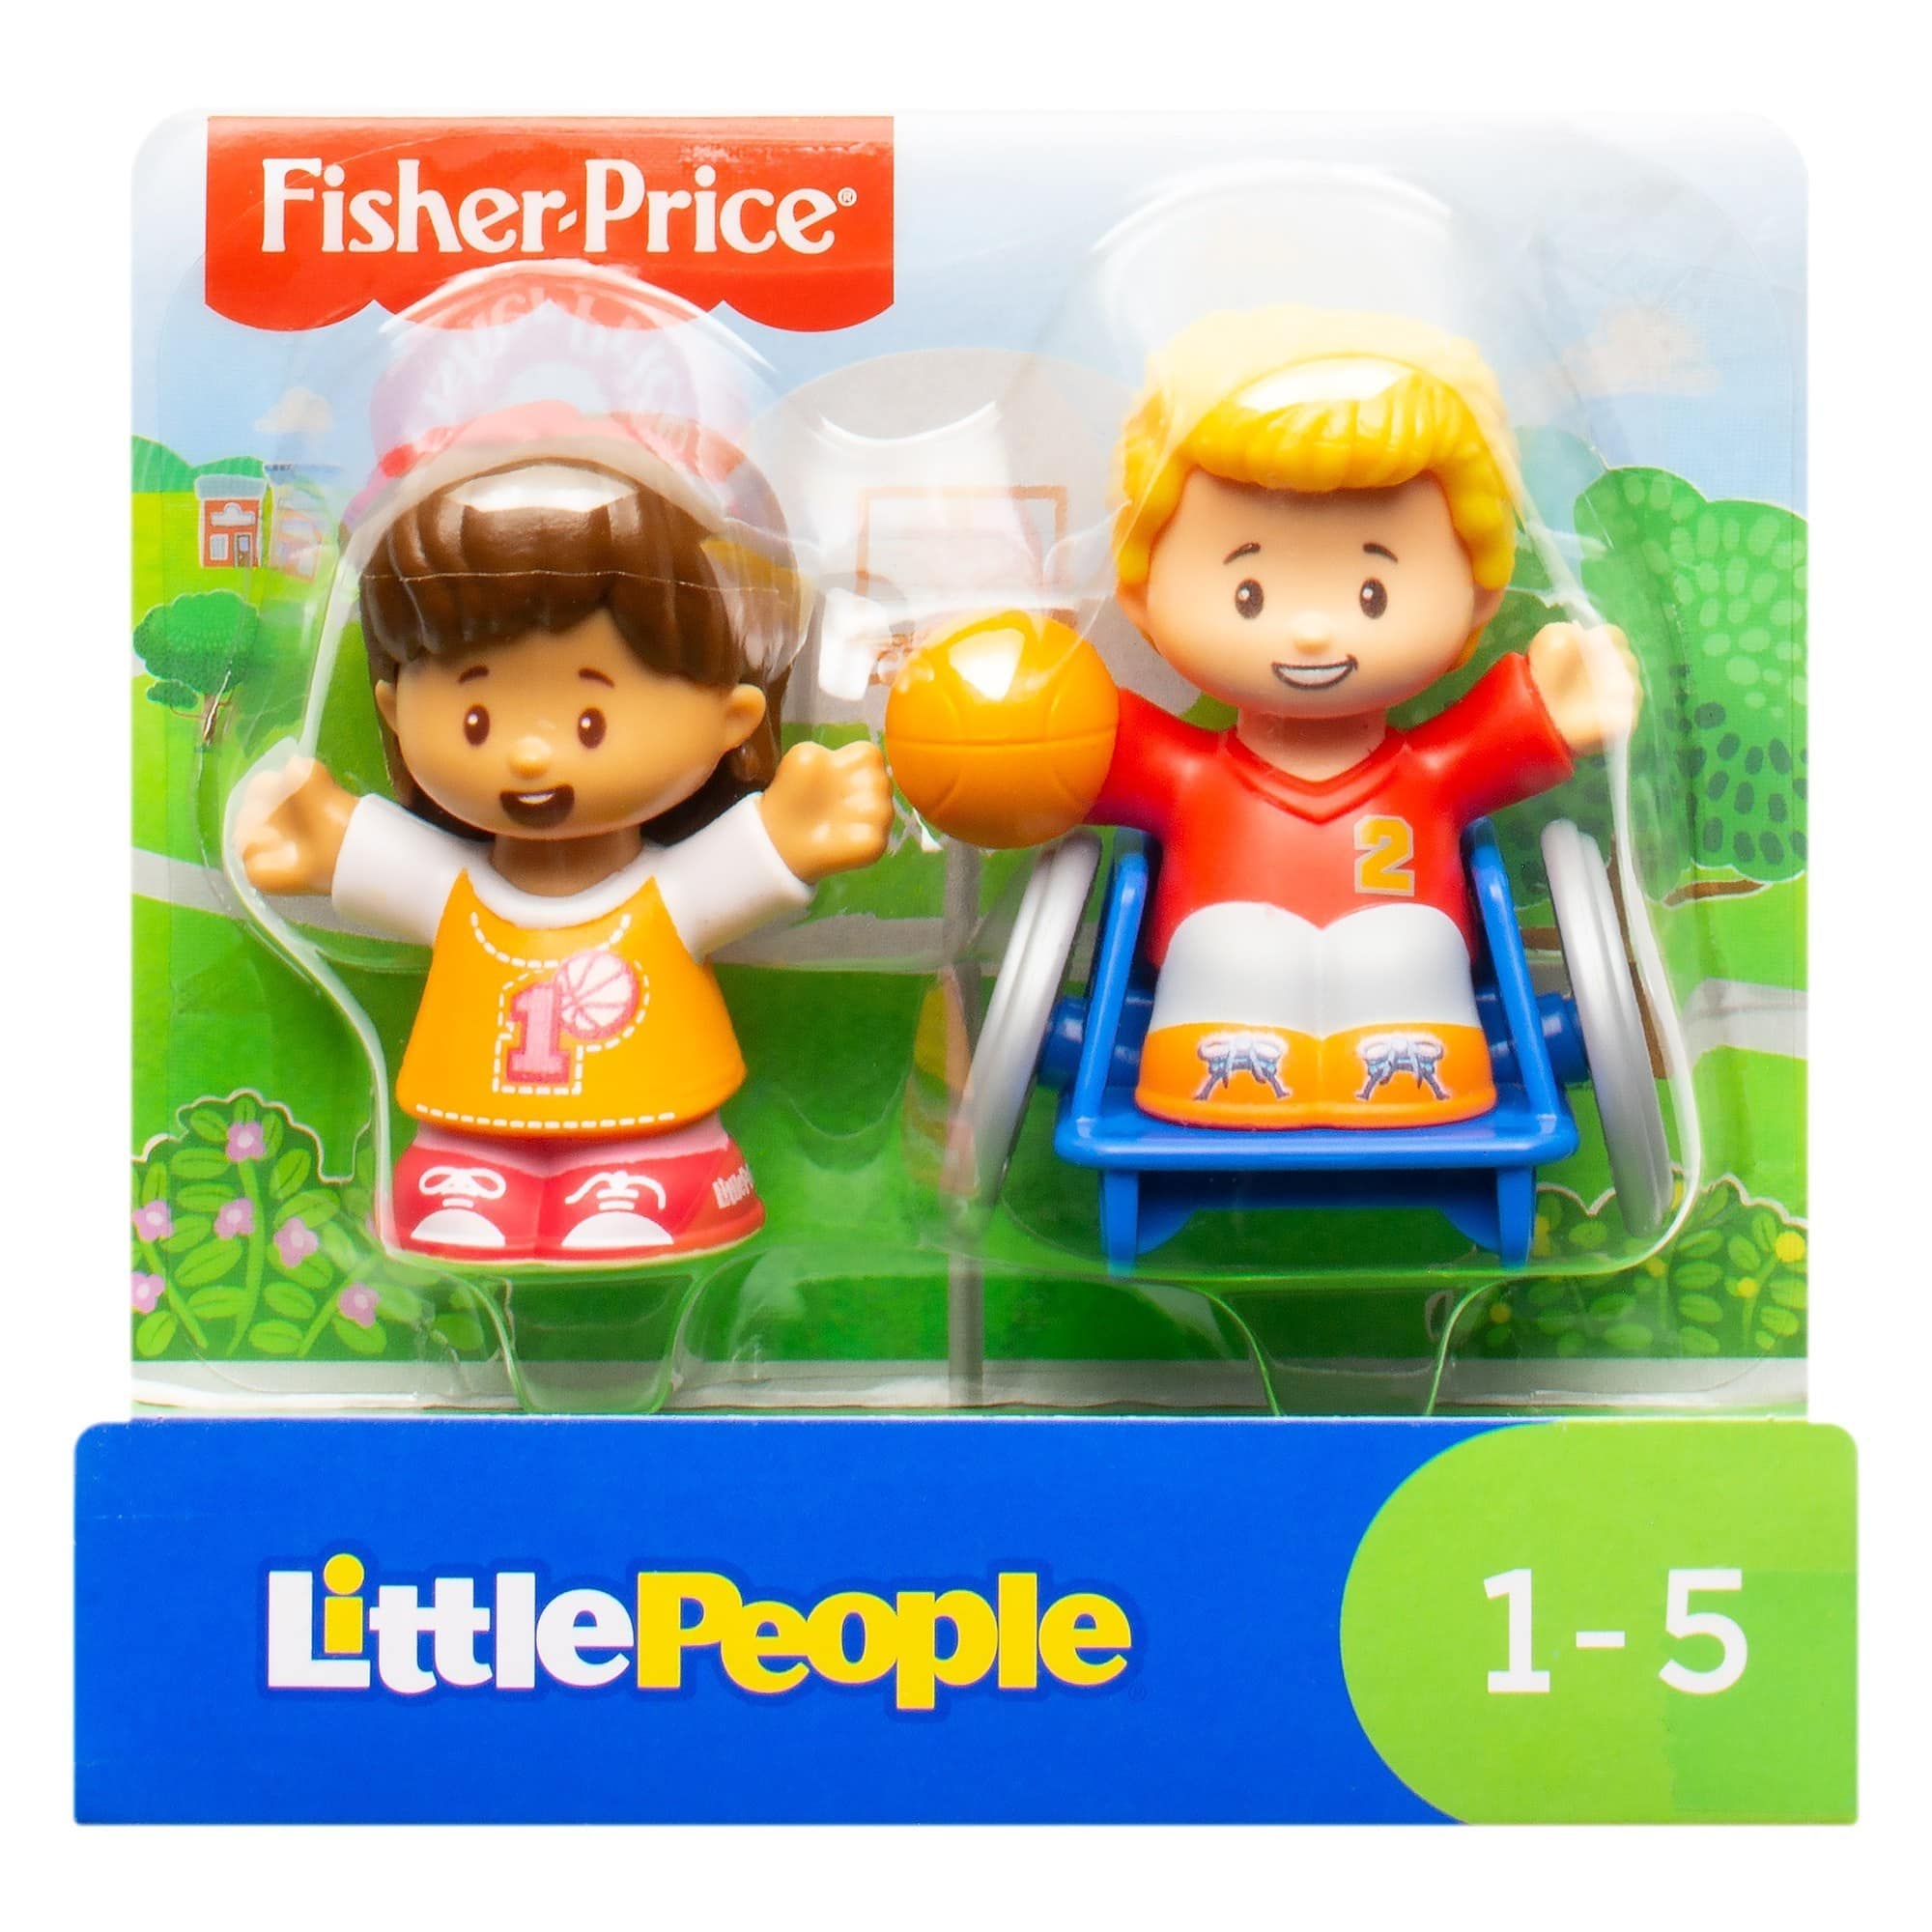 Fisher Price - Little People Figures - Josh and Mia